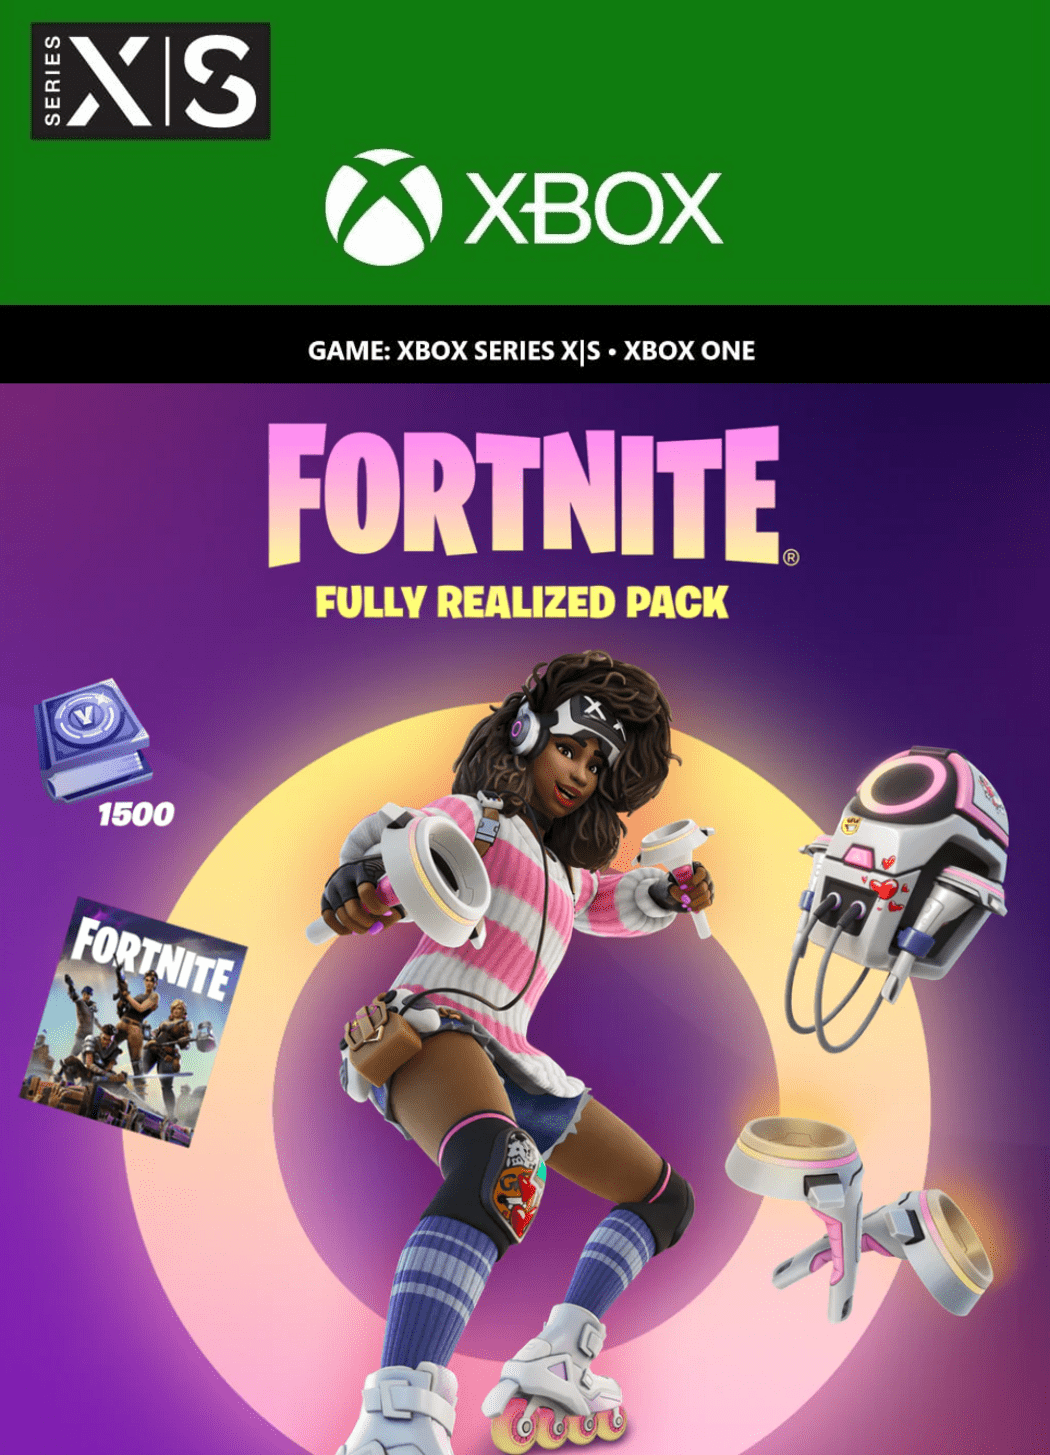 Fortnite on X: Starting today V-Bucks purchased on PlayStation can now be  used across Xbox, PC, cloud gaming, and Android too 🎉 Read all about the  update to Fortnite Shared Wallet in